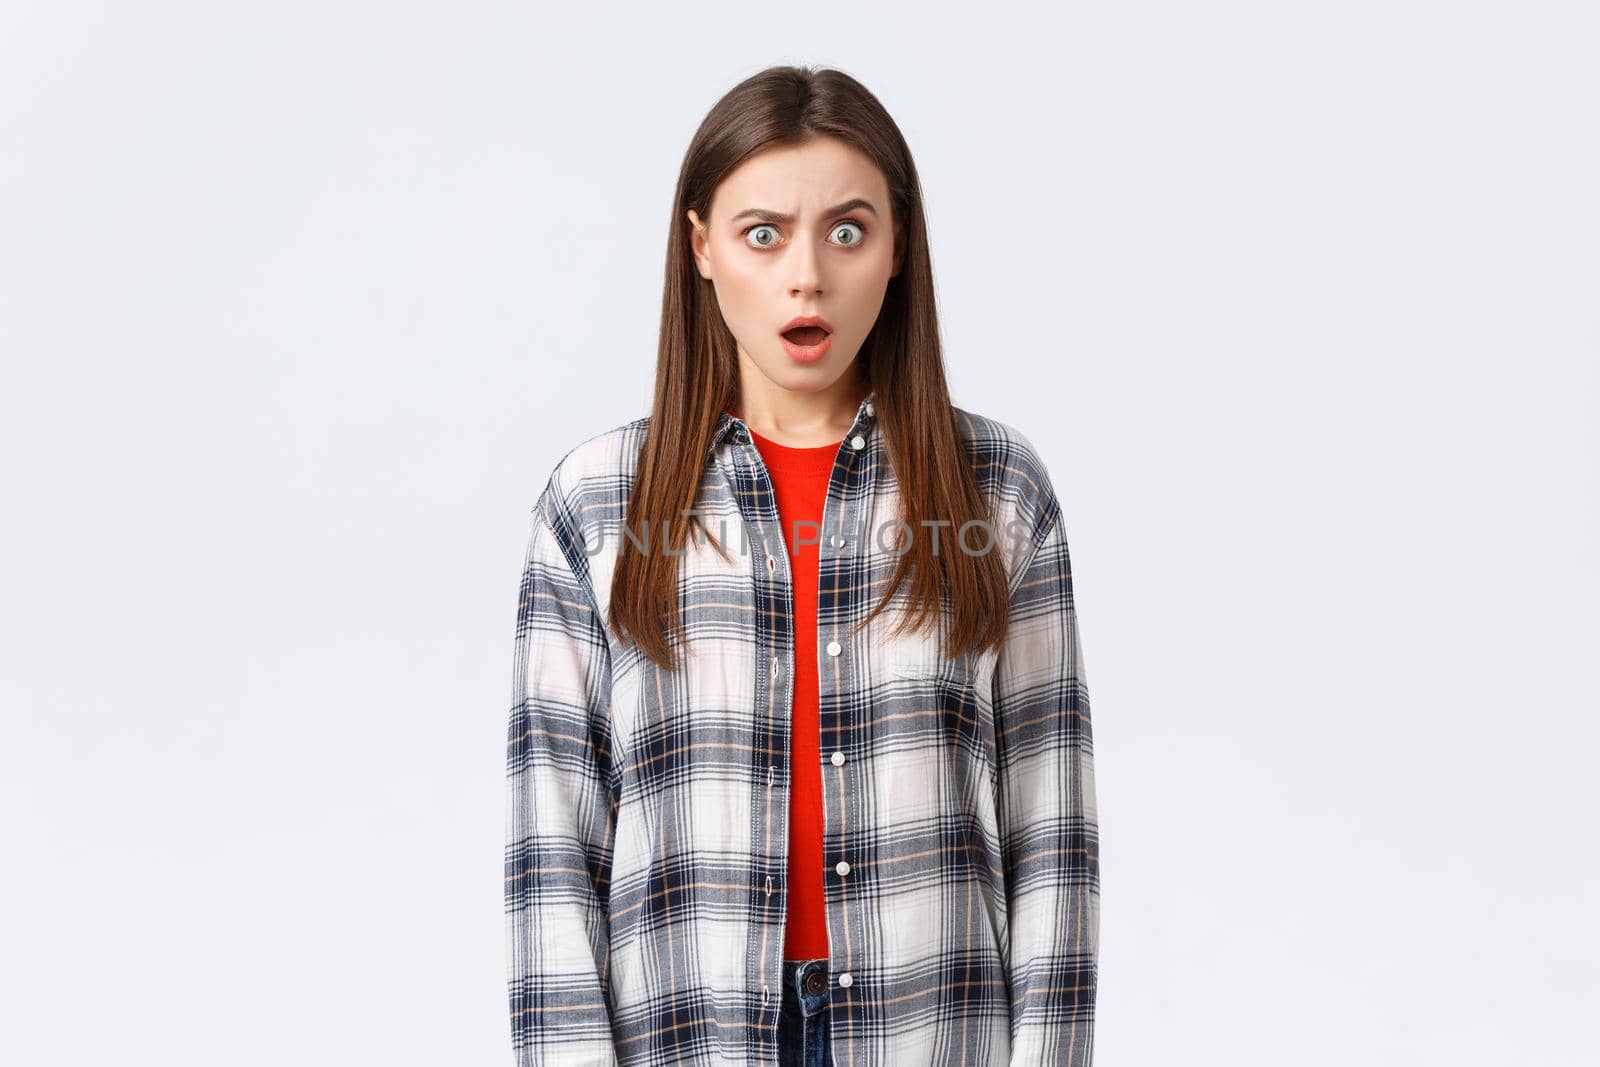 Lifestyle, different emotions, leisure activities concept. Shocked and puzzled attractive female student hear something strange, surprising news, drop jaw and staring astonished camera.